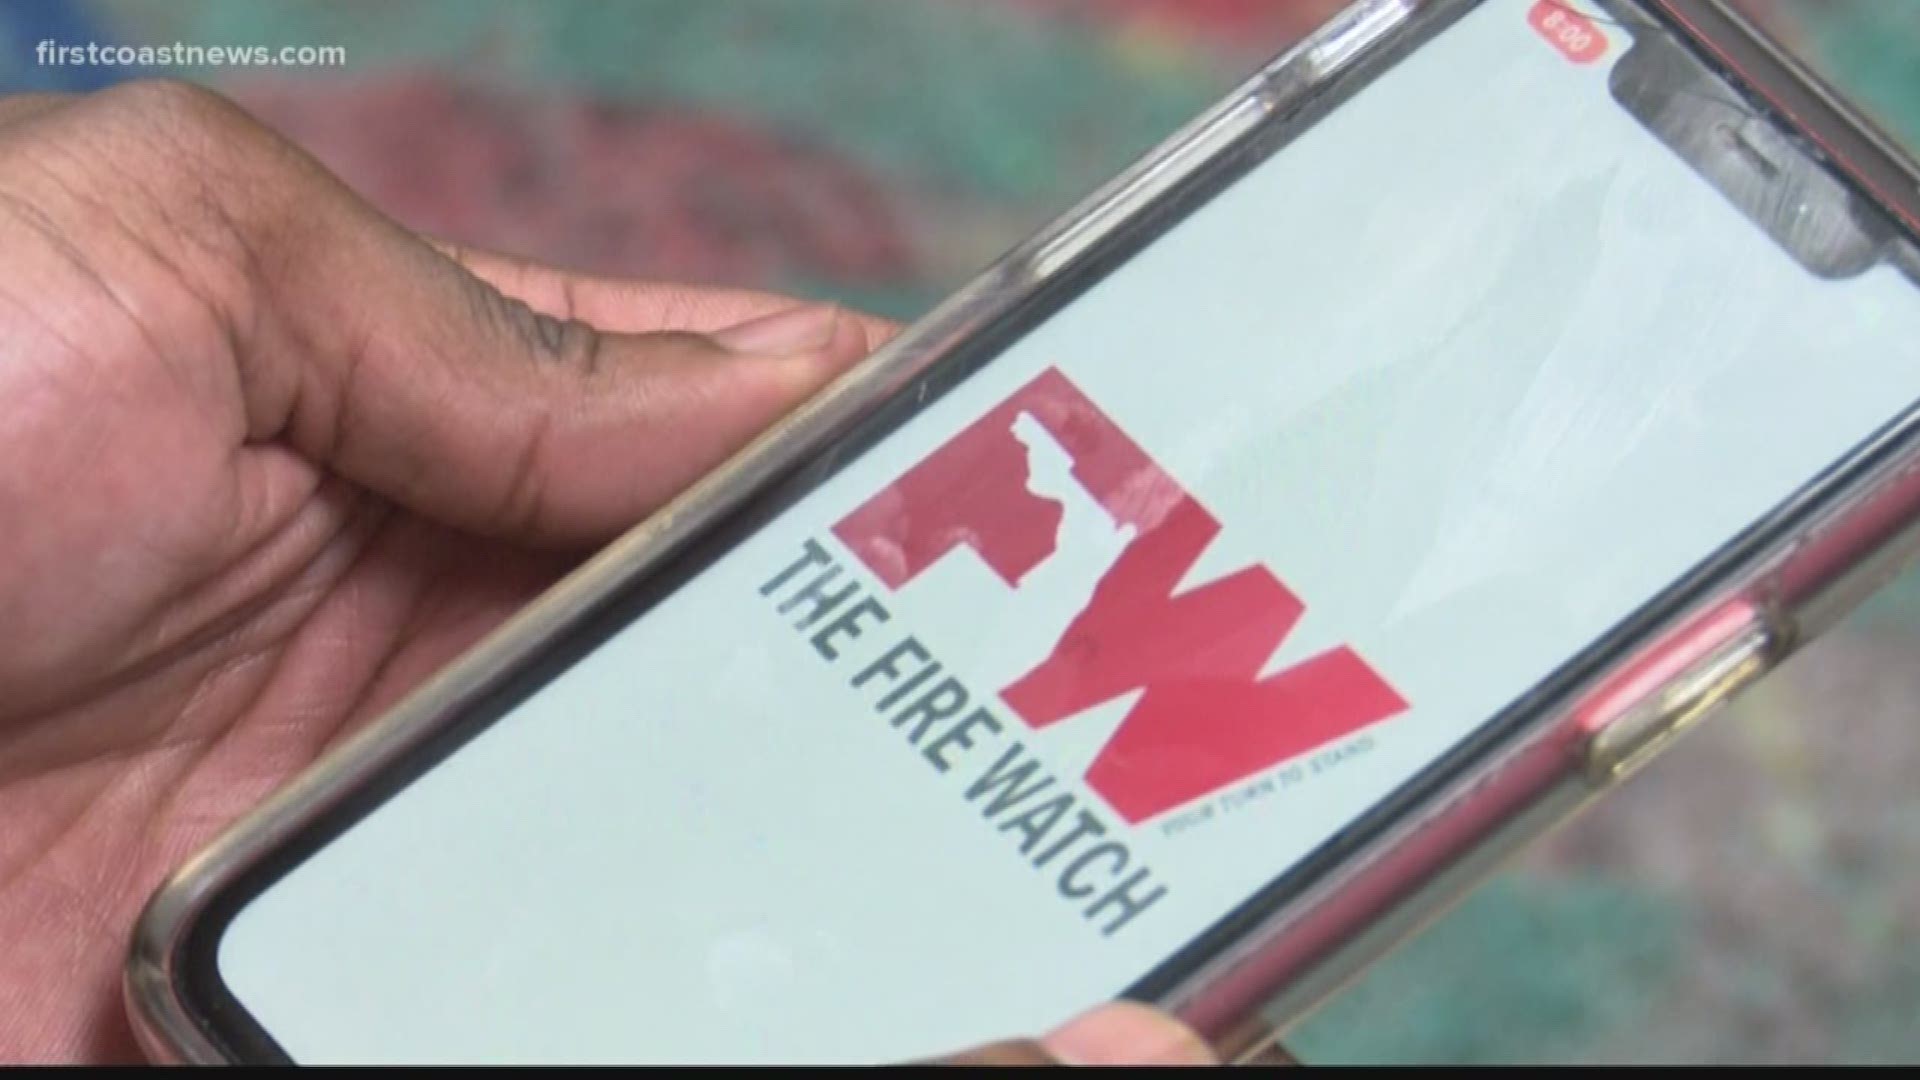 The Fire Watch App launched on Thursday with a purpose to connect veterans with local resources during crisis situations.